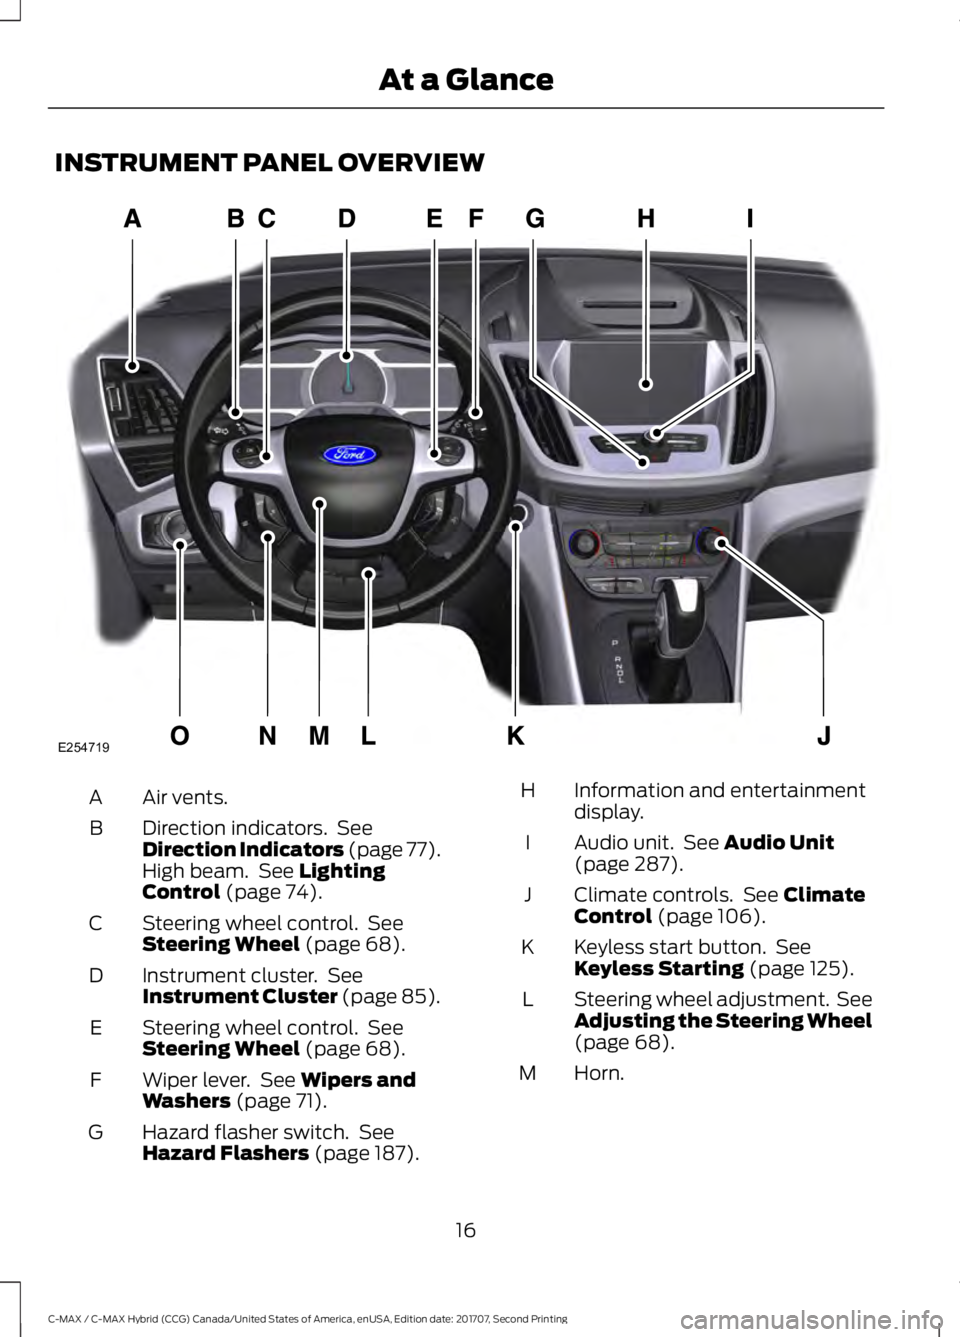 FORD C-MAY HYBRID 2018  Owners Manual INSTRUMENT PANEL OVERVIEW
Air vents.
A
Direction indicators.  See
Direction Indicators (page 77).
High beam.  See Lighting
Control (page 74).
B
Steering wheel control.  See
Steering Wheel
 (page 68).
